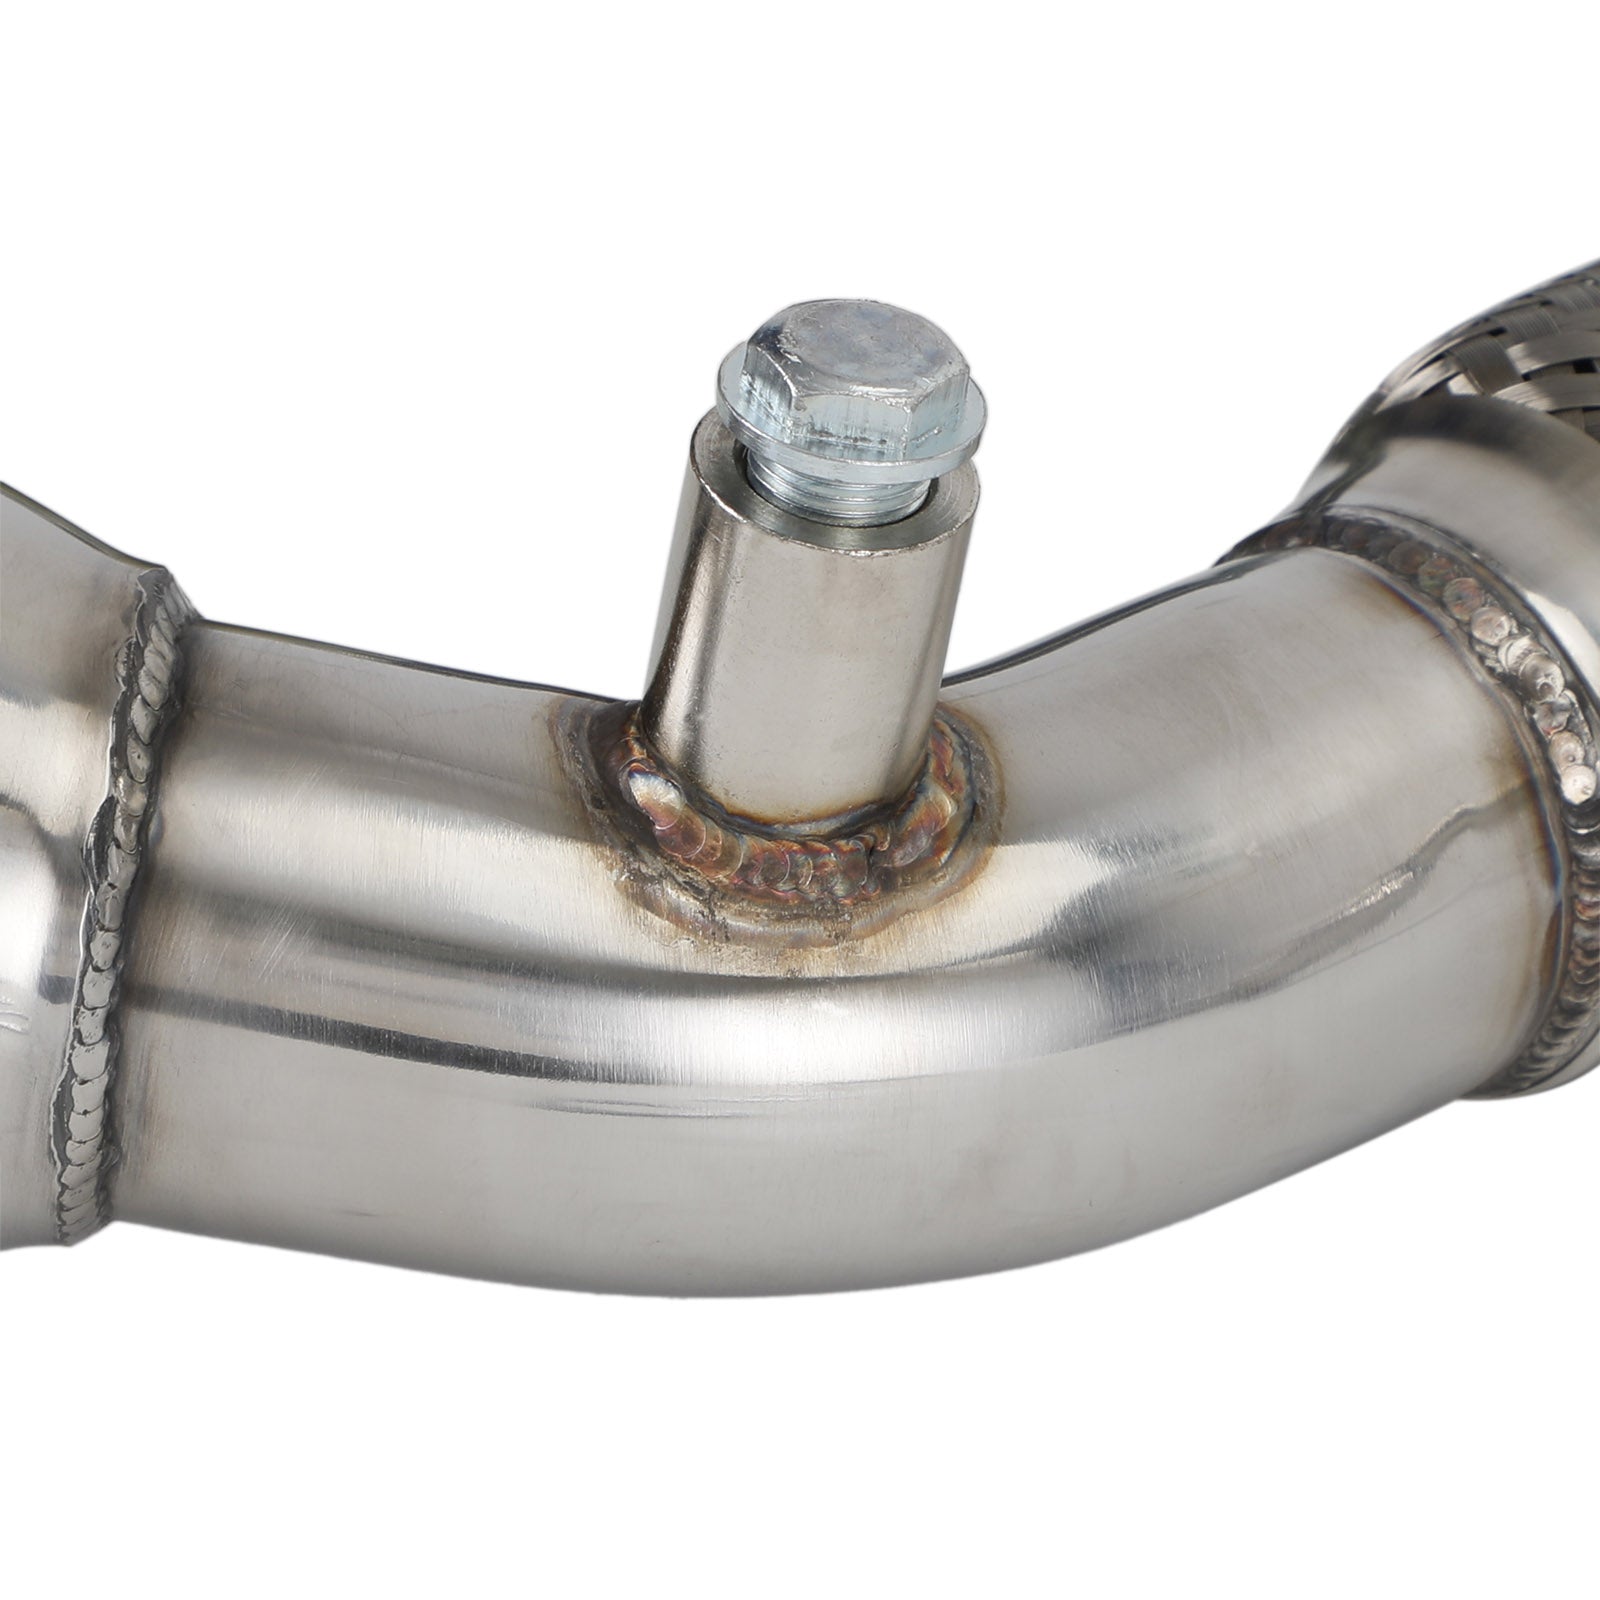 Nissan 2003-2006 350Z Infiniti G35 FX35 Test Pipes Exhaust DownPipe